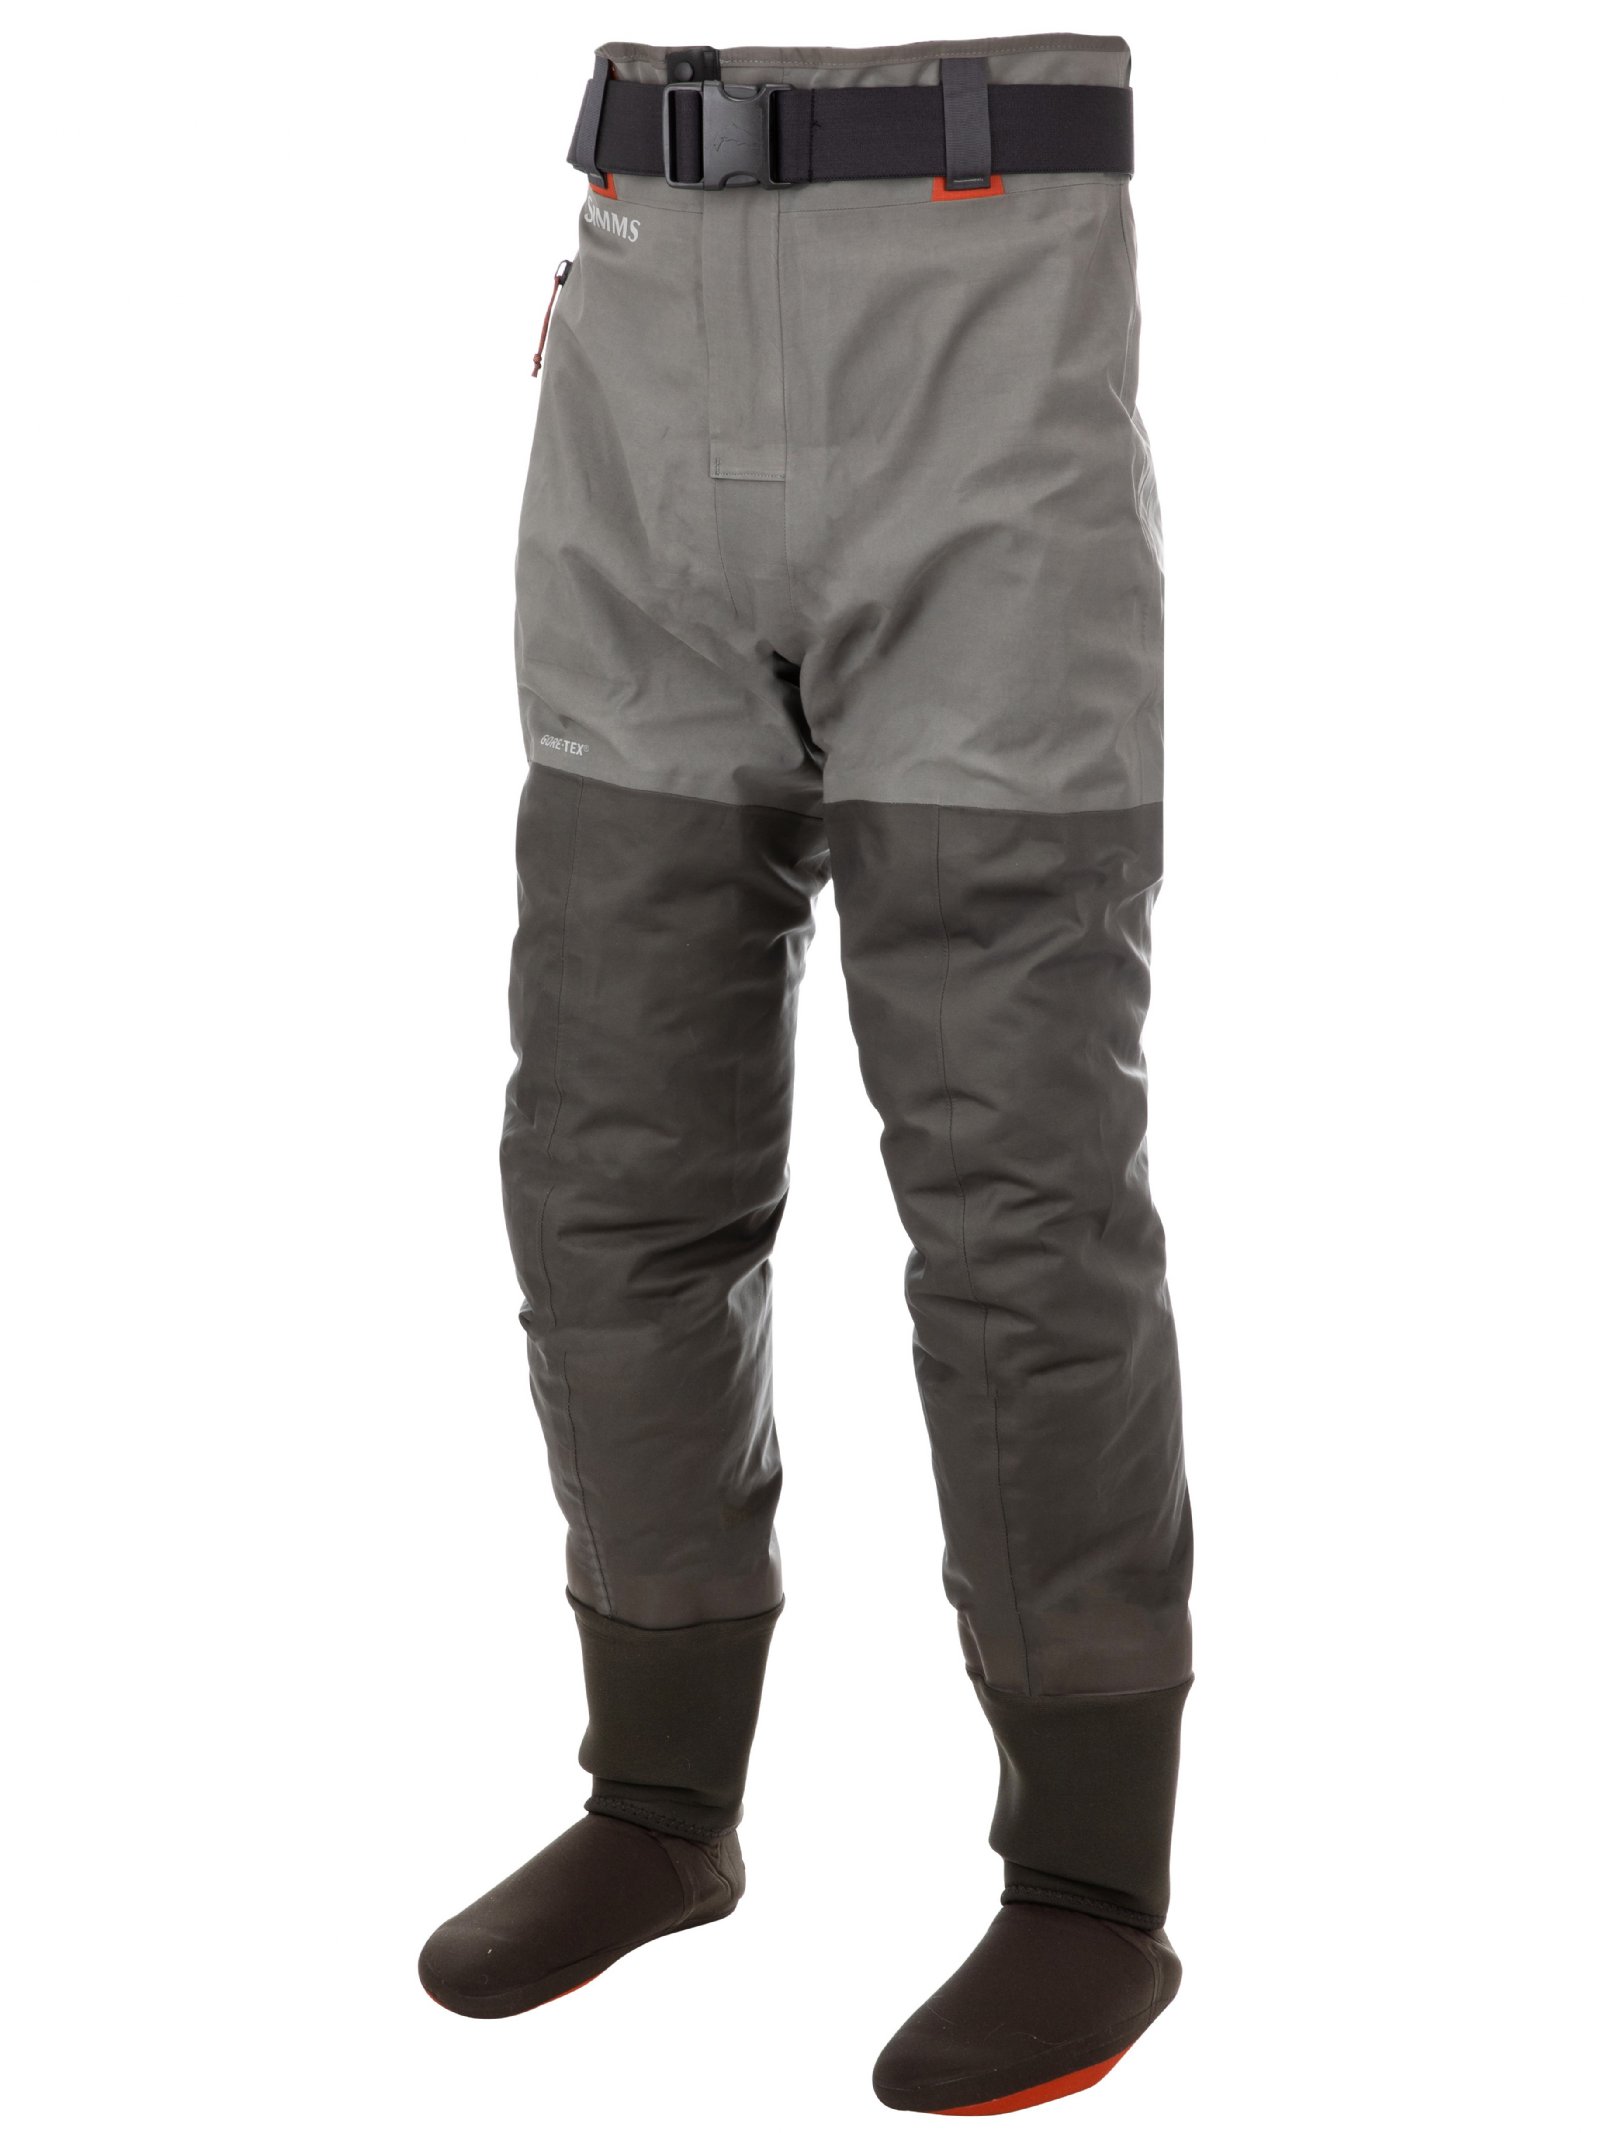 Simms M's G3 Guide Wading Pant - Large King